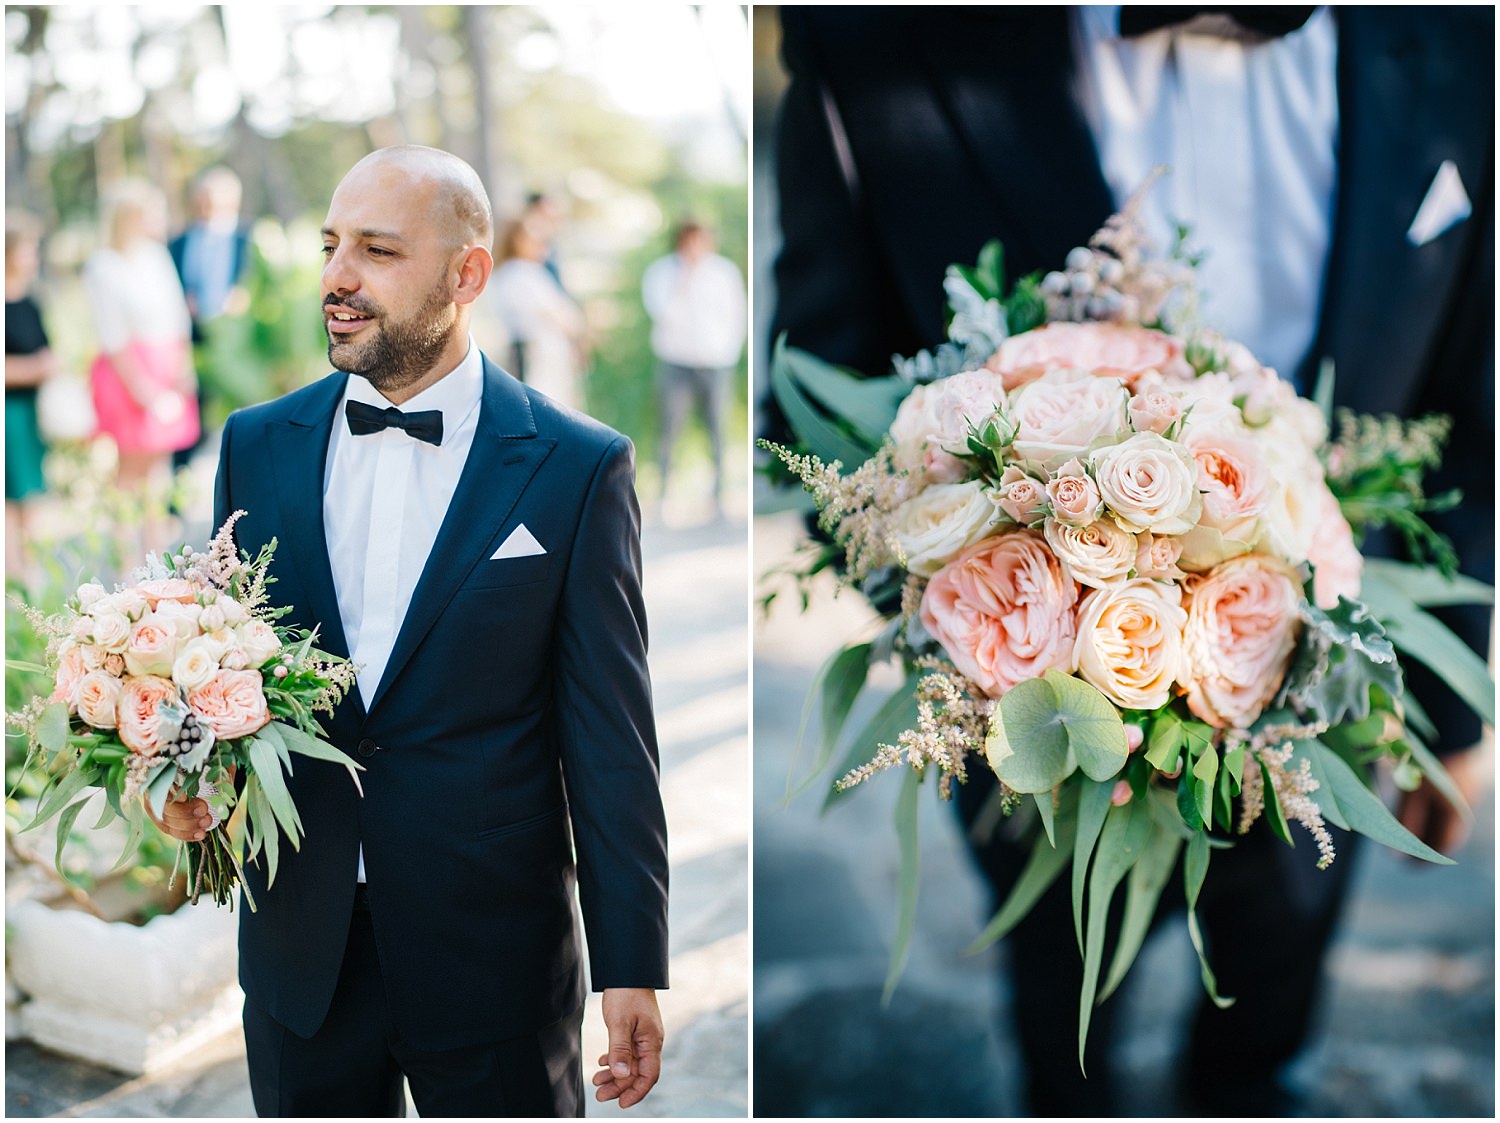 Romantic wedding with pink gold geometric details